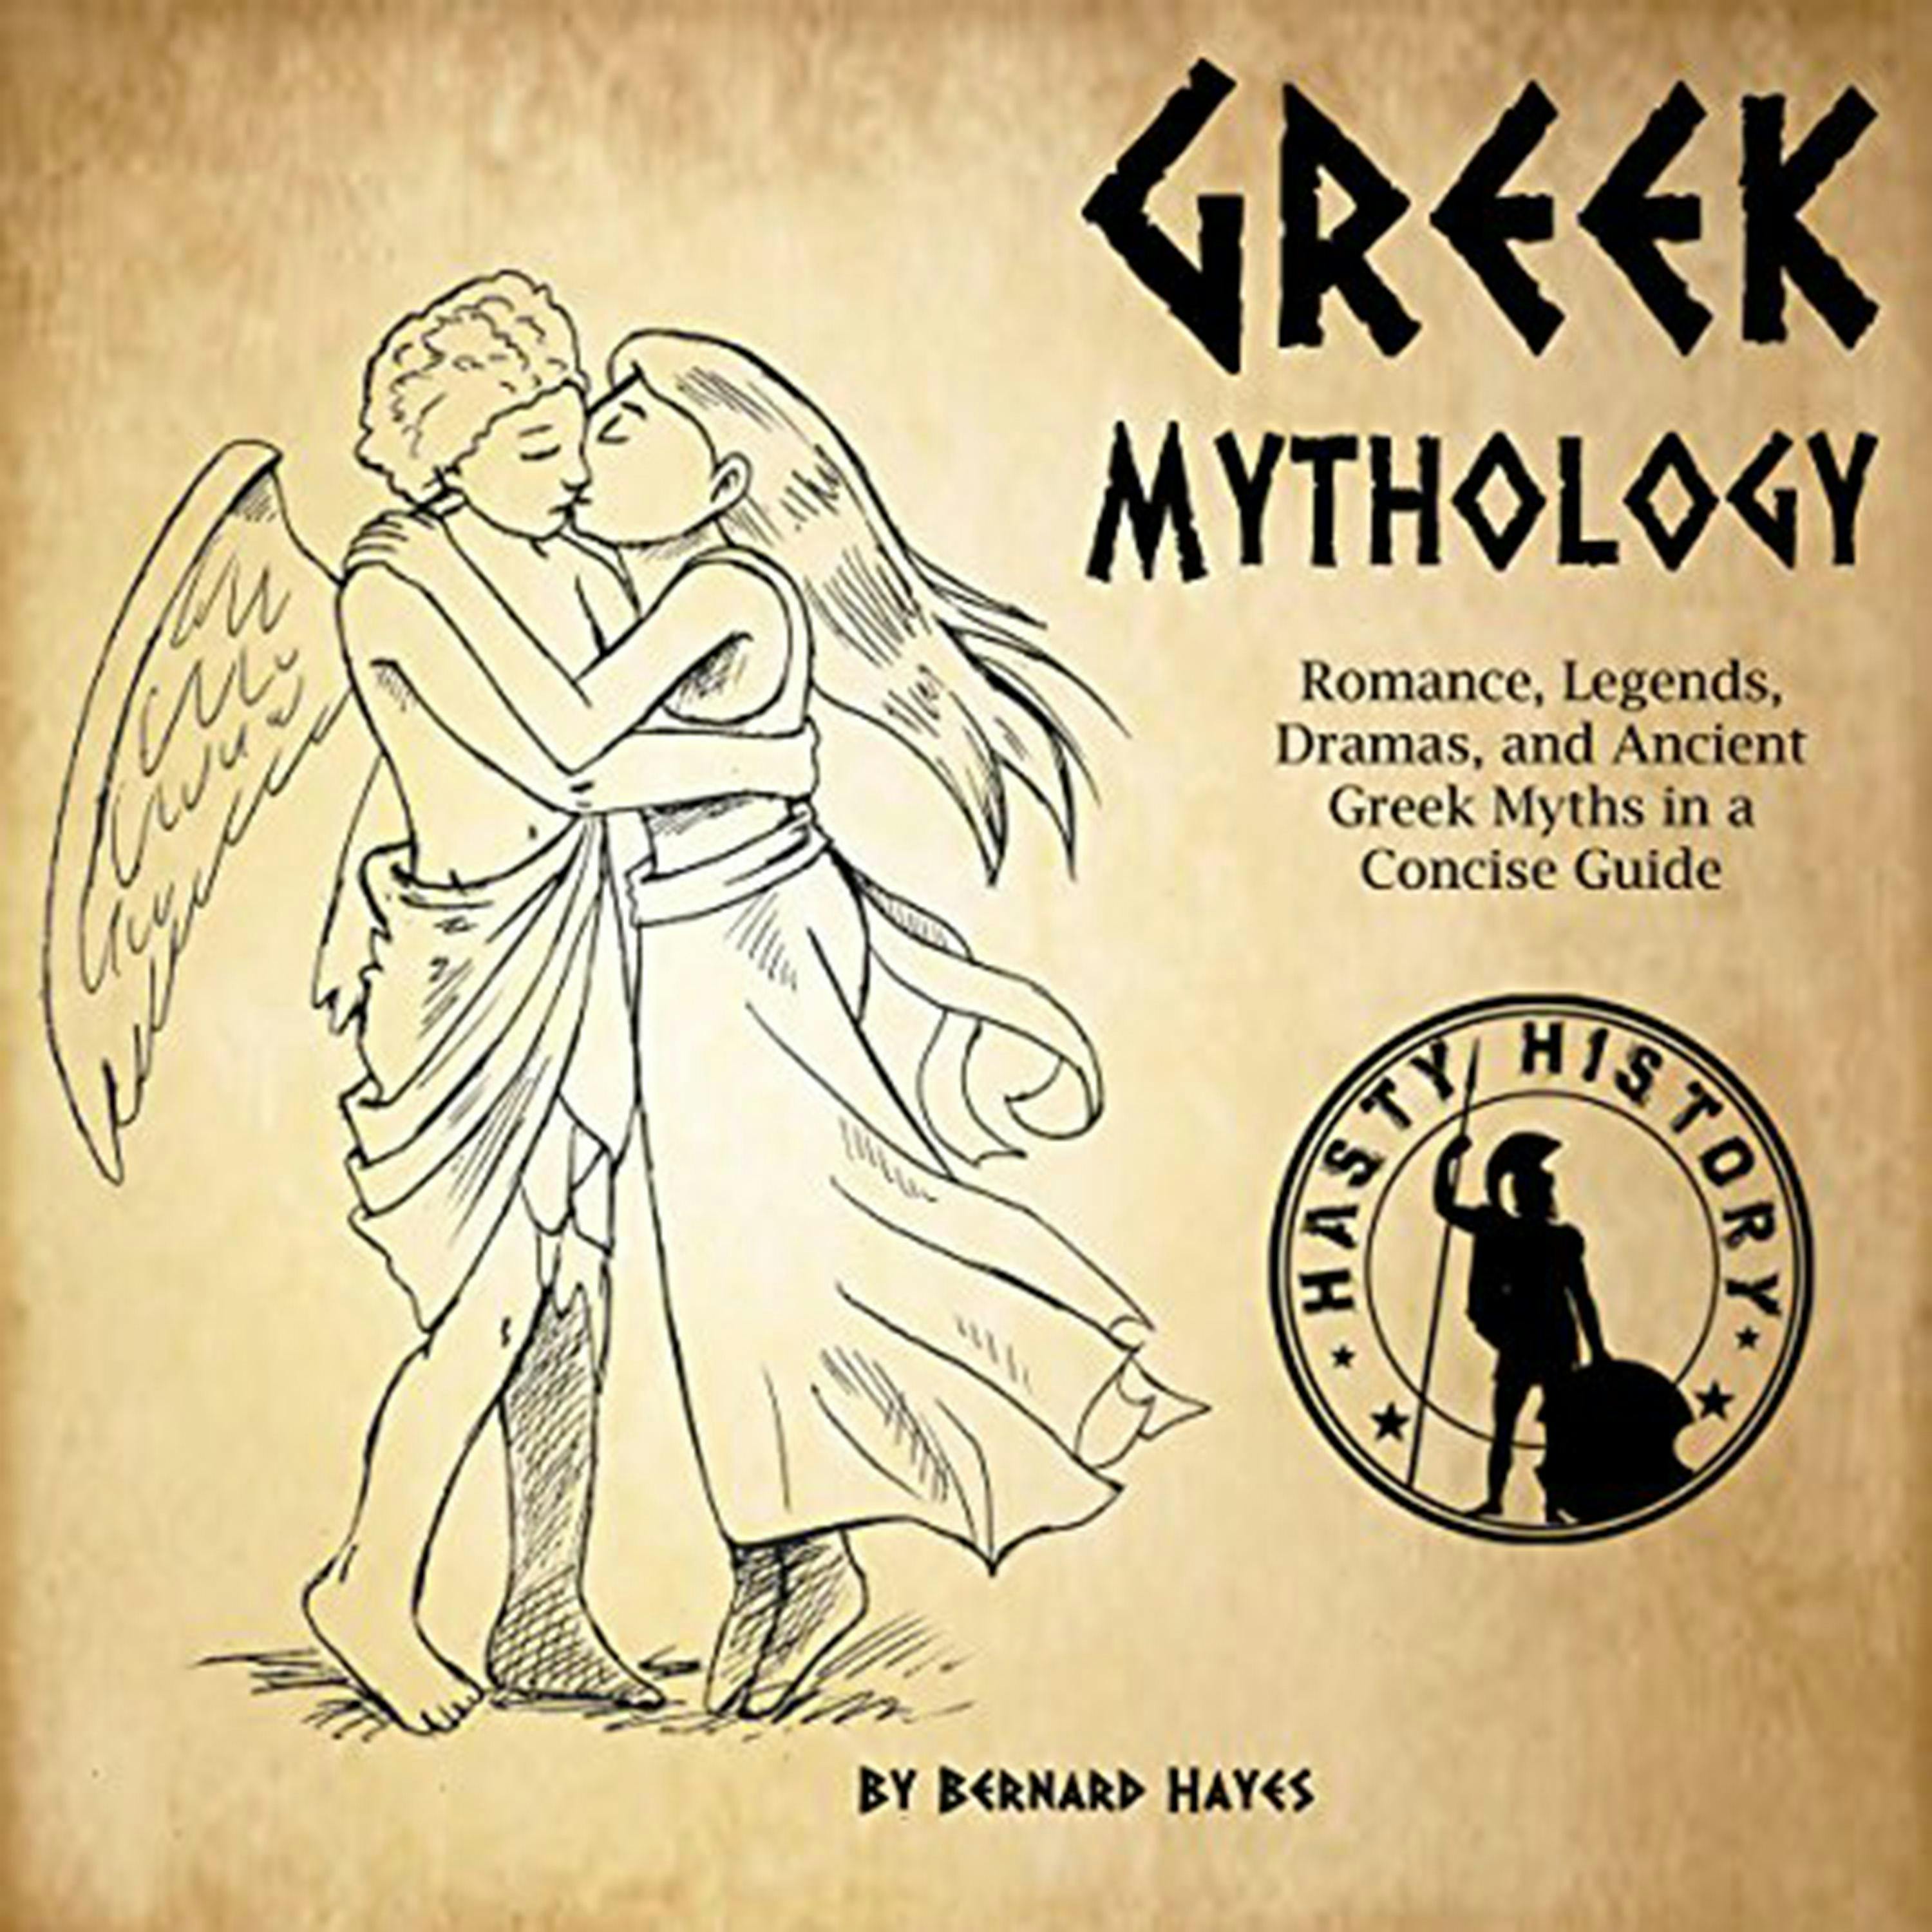 Greek Mythology: Romance, Legends, Dramas, and Ancient Greek Myths in a Concise Guide - Bernard Hayes